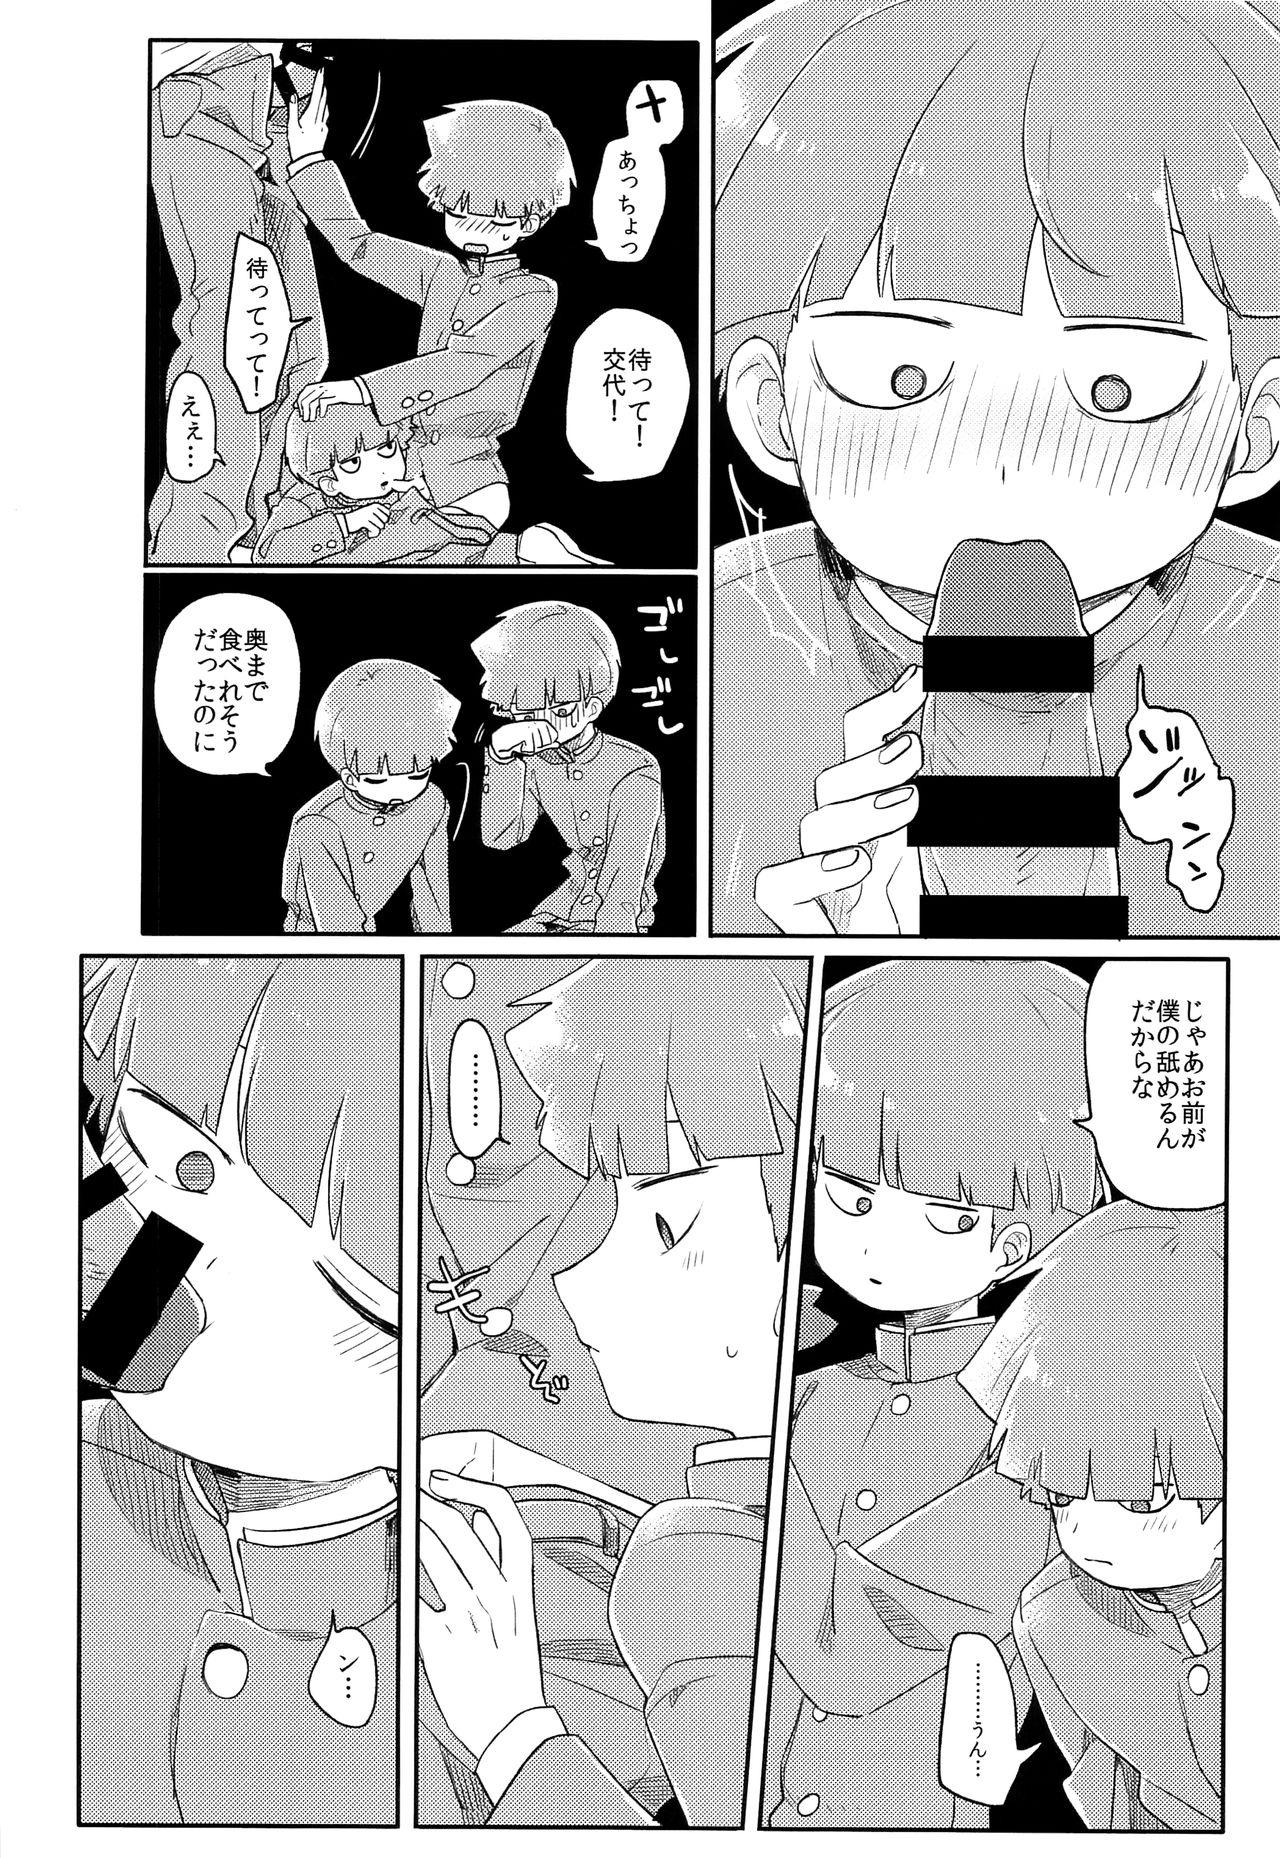 Tease Dare? - Mob psycho 100 Hot - Page 12